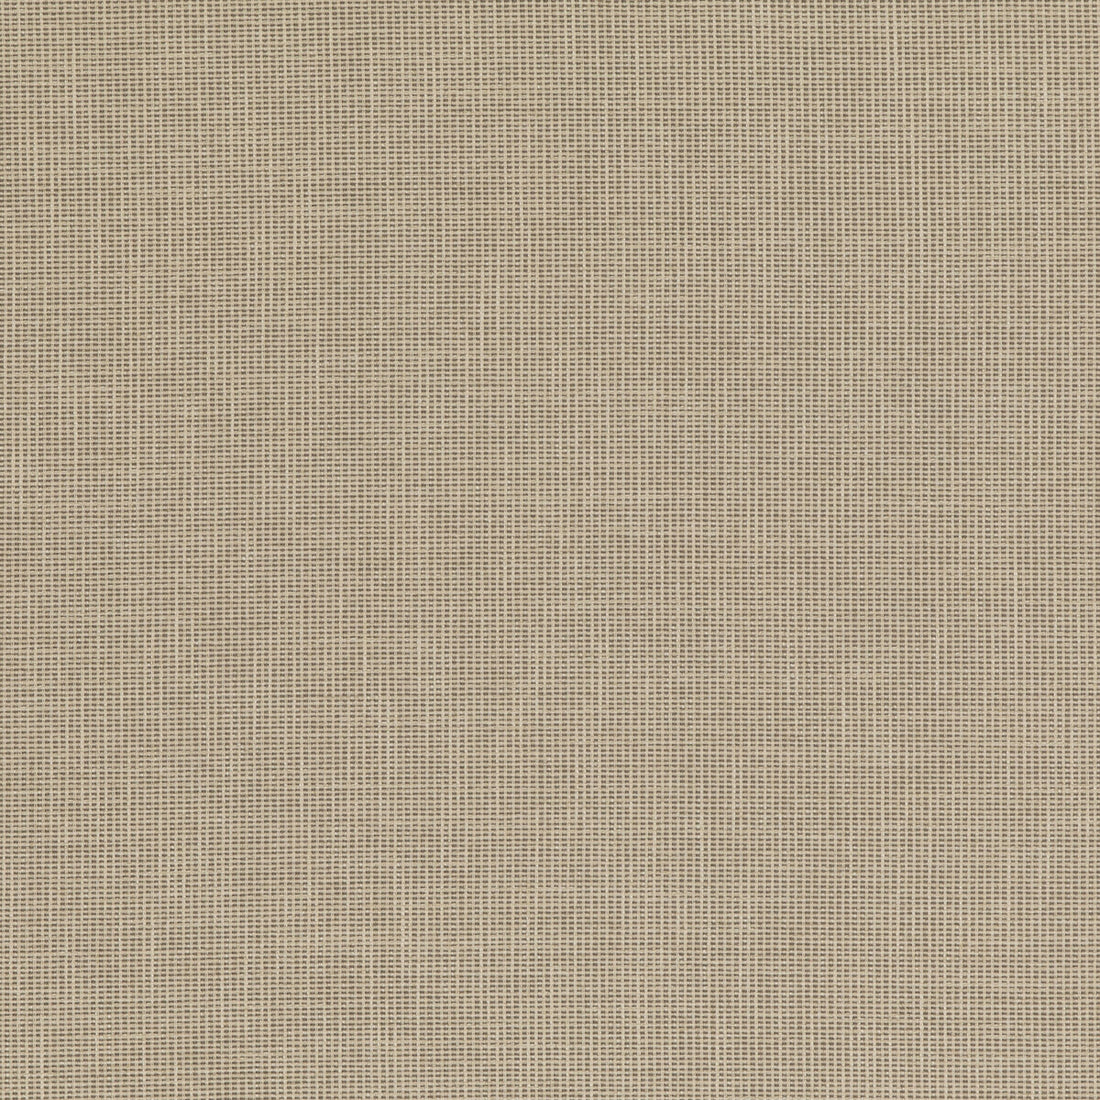 Folly fabric in pebble color - pattern PF50487.930.0 - by Baker Lifestyle in the Block Weaves collection